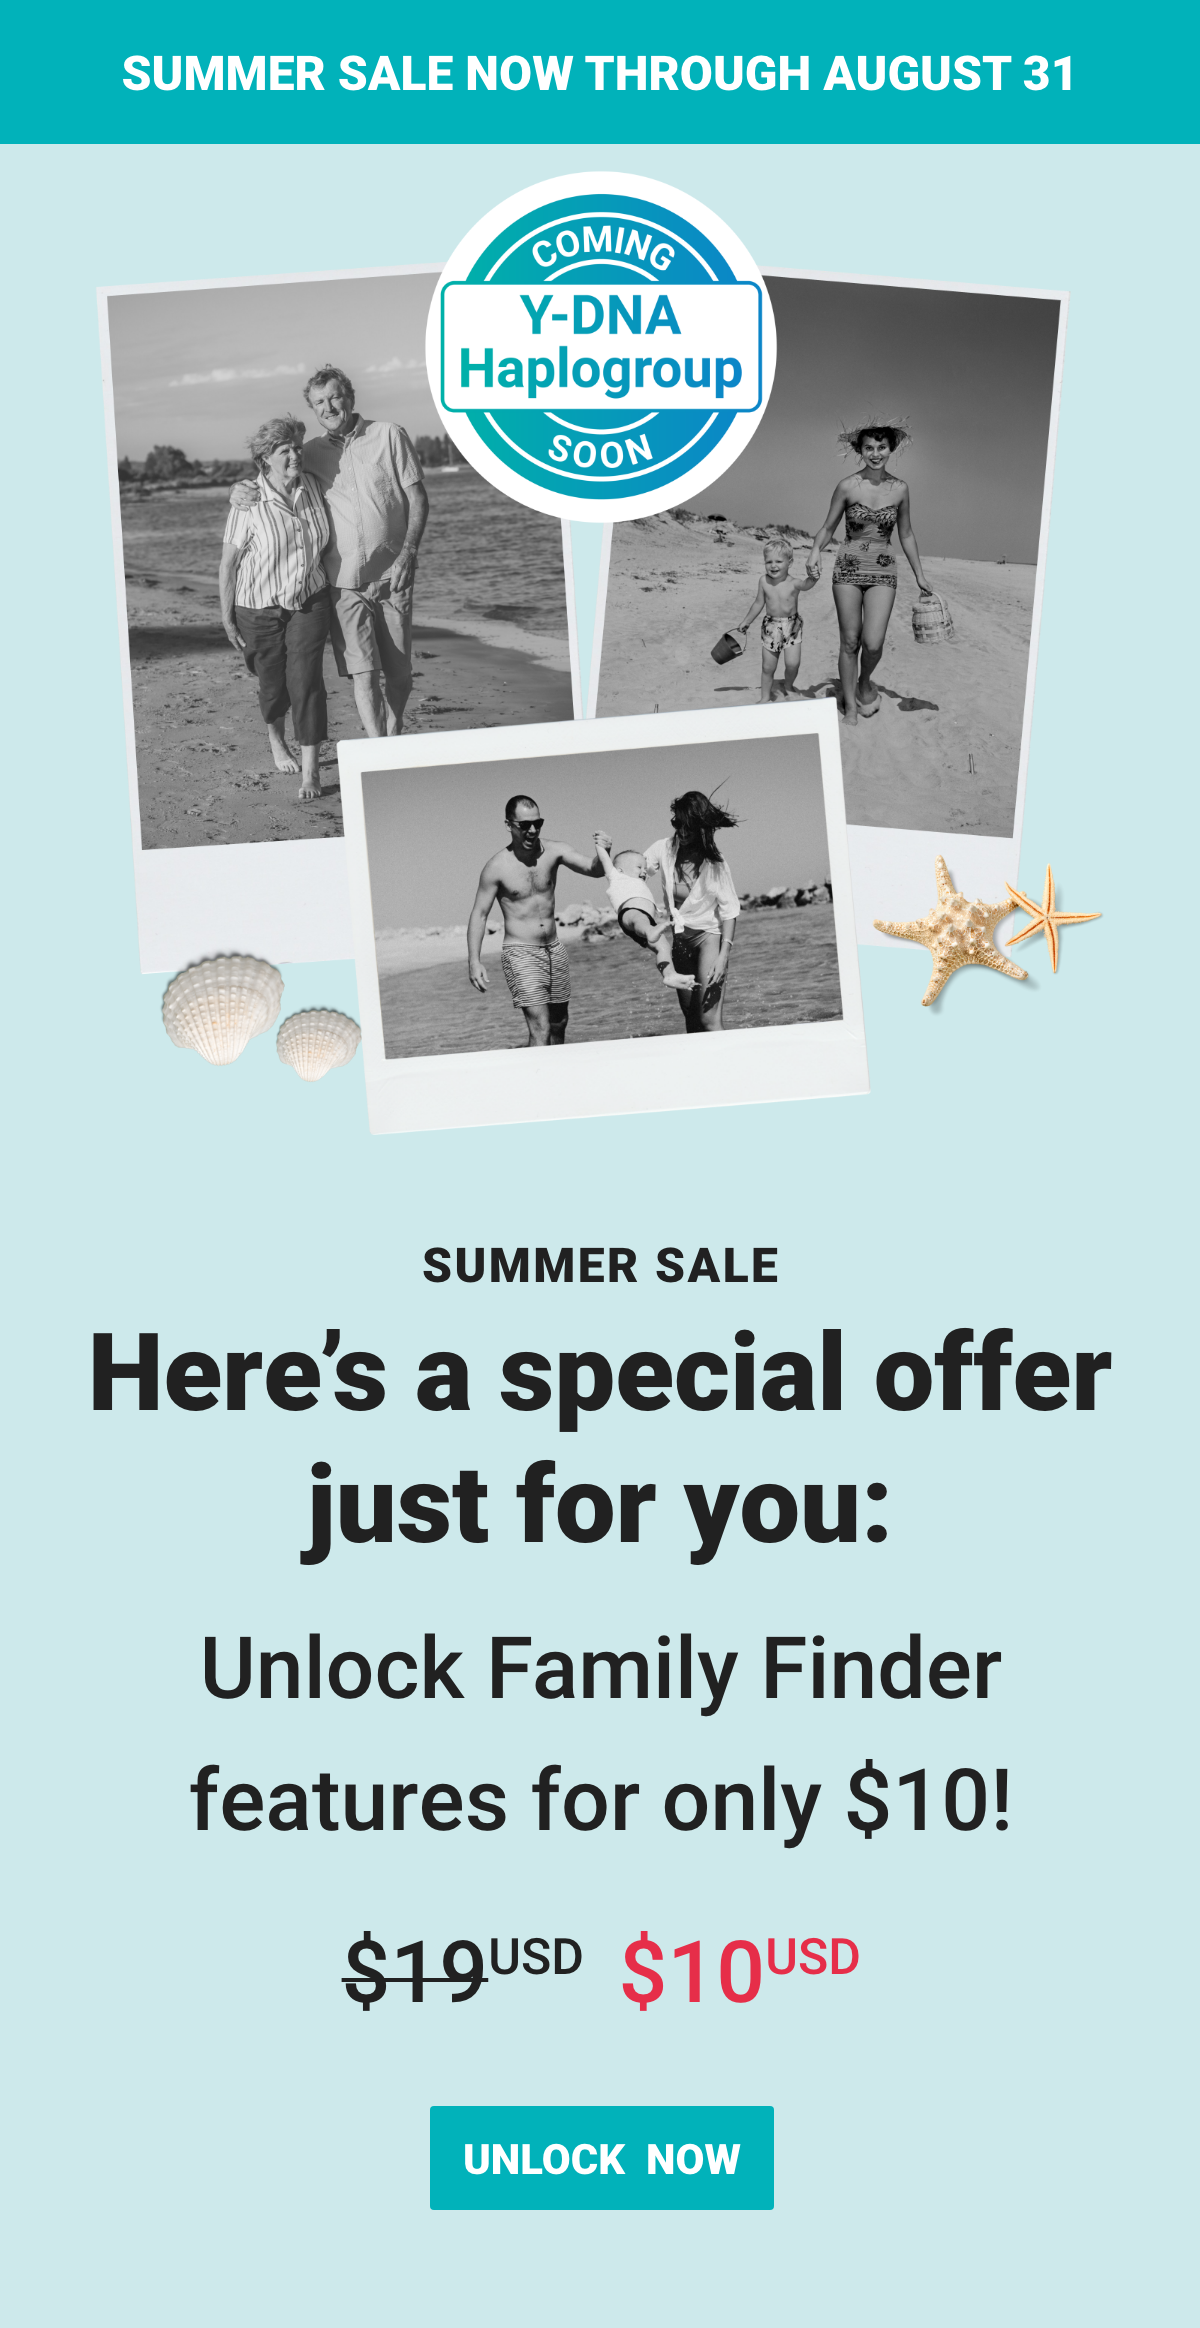 FamilyTreeDNA Sale! When it comes to DNA and genealogy, FISH IN MANY PONDS! UPLOAD your DNA test result data it to another DNA site such as FamilyTreeDNA in order to get more matches and gain greater insights into the data. NOW through 31 August, you can unlock ALL PREMIUM FEATURES of the Autosomal Data Upload for just $10 USD (regular price is $19 USD). And get ready to make some REAL PROGRESS with your DNA test results!